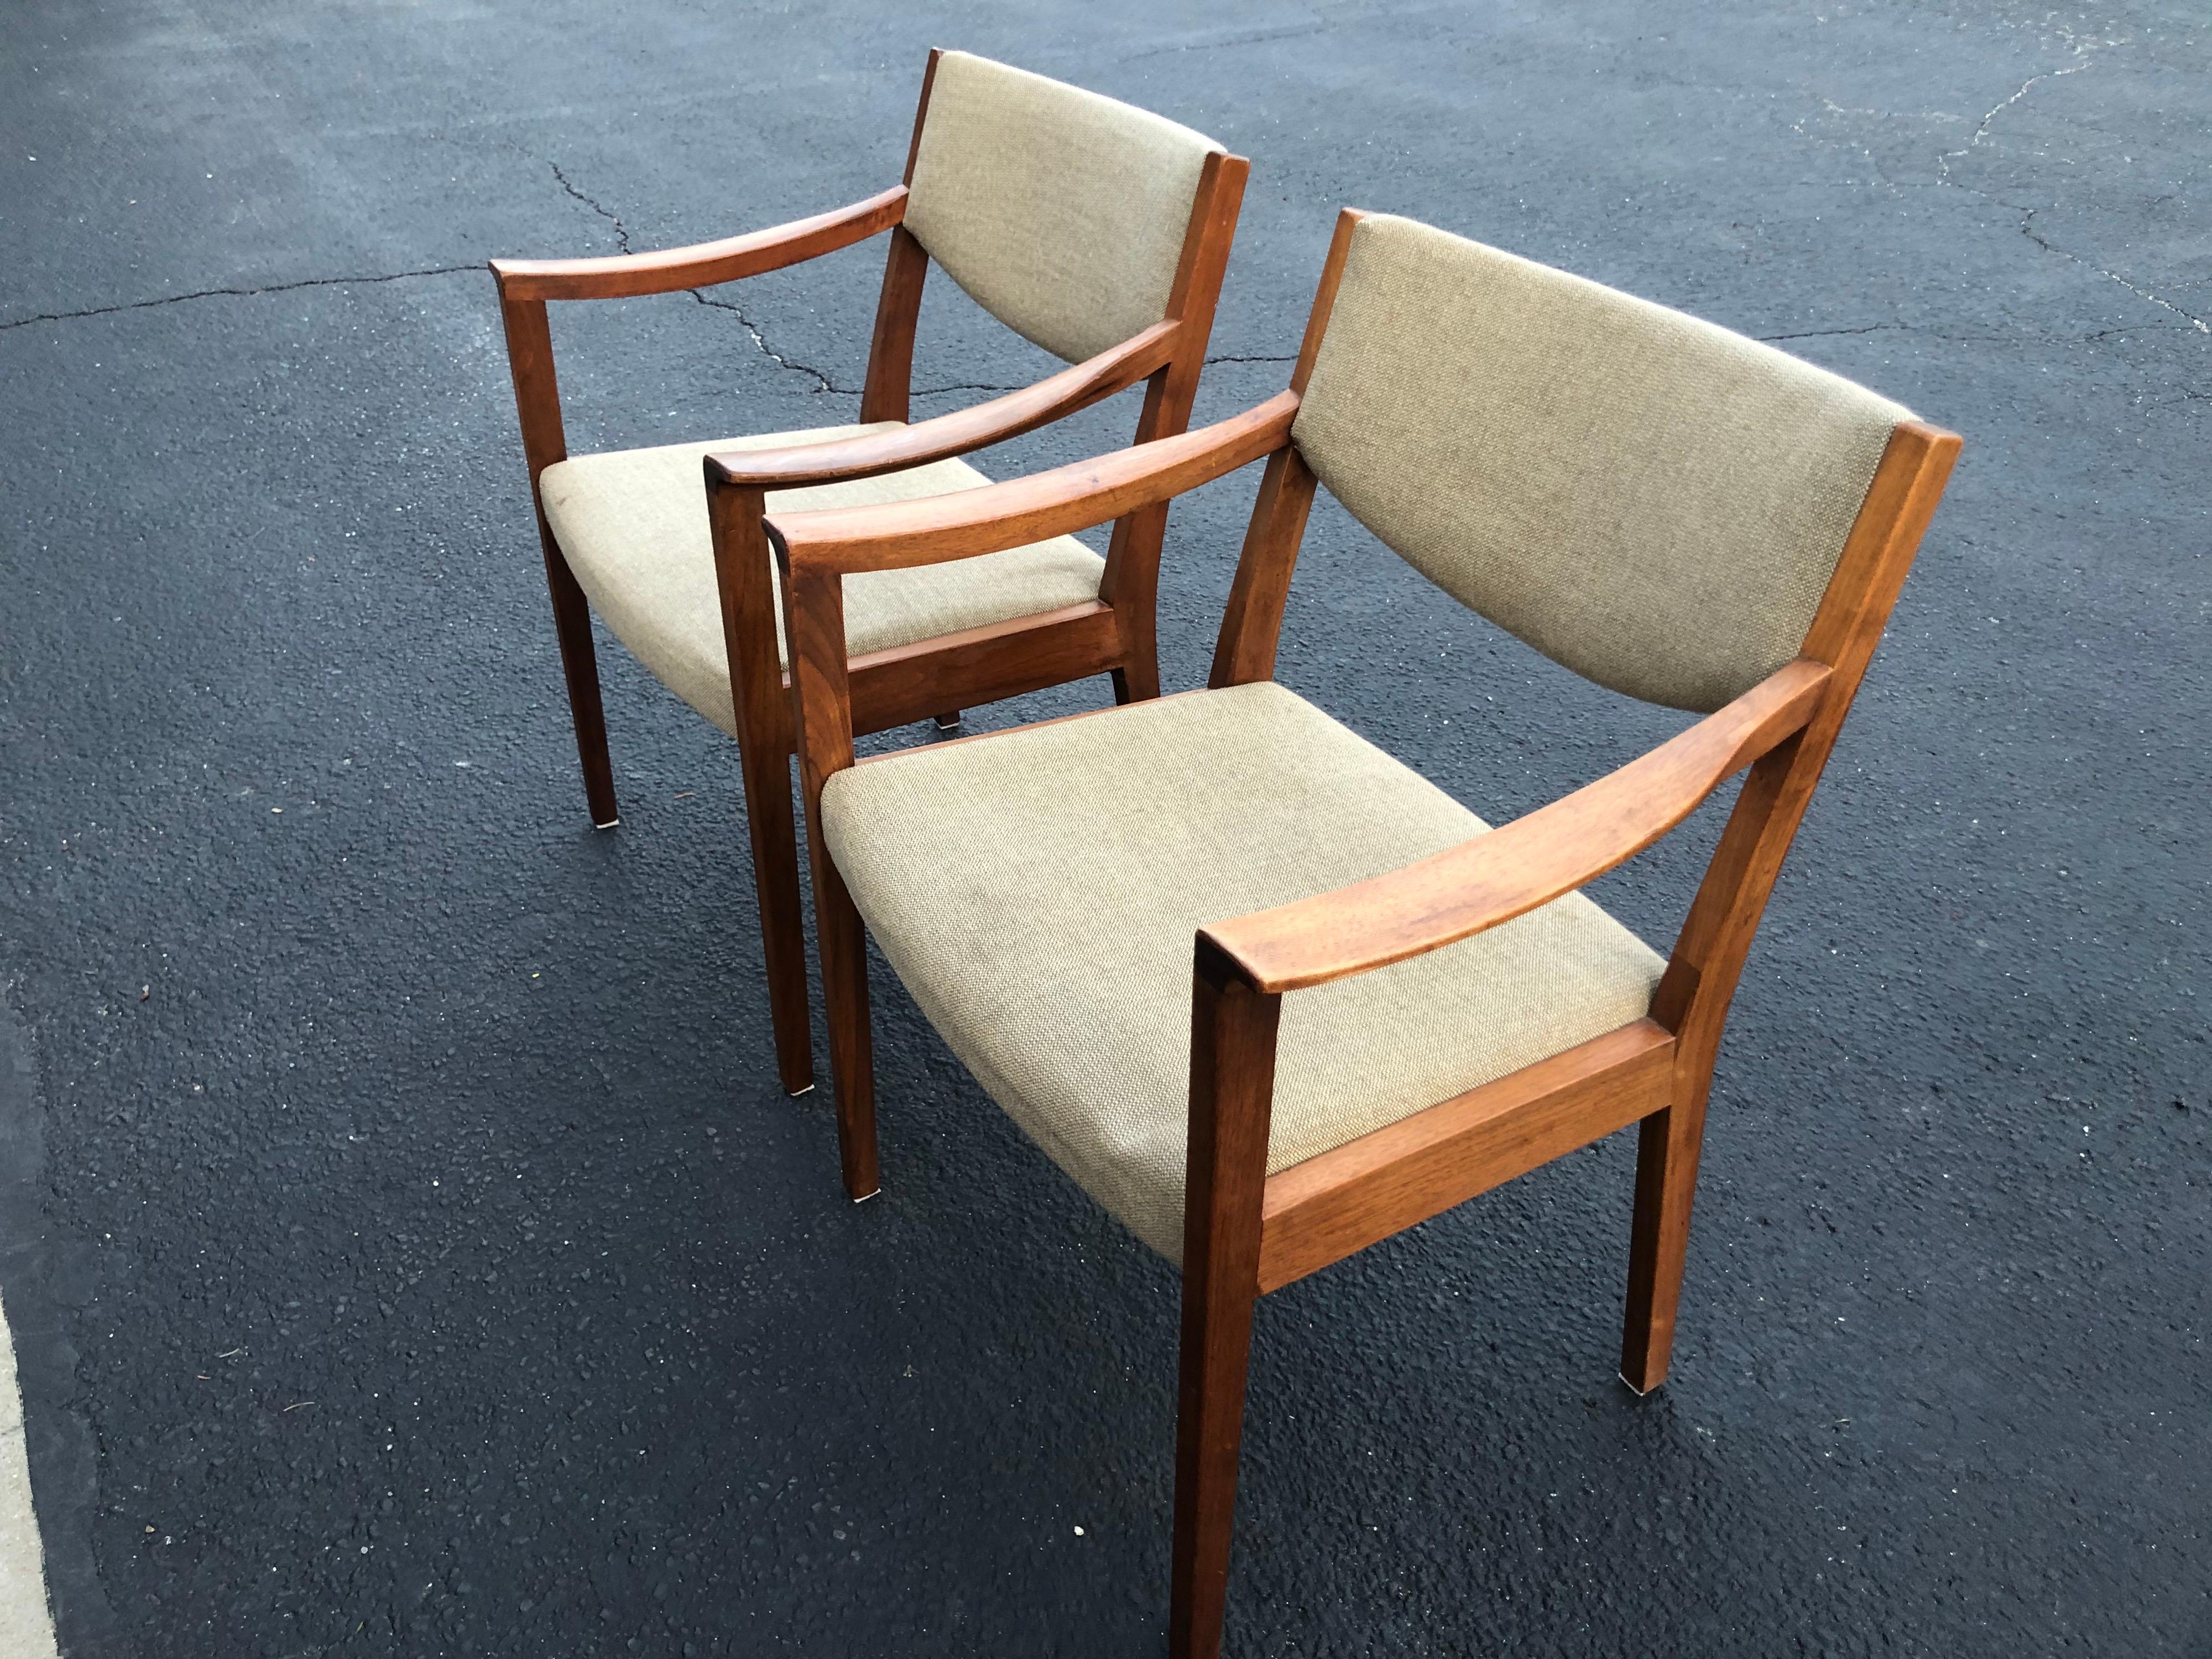 Pair of solid walnut Gunlocke armchairs. Iconic design for that 1960s office. -Price is for the pair (2)

These came out of the Headquarters of Boehringer Ingelheim which was founded in the early 1970s. They have the original purchase labels on the